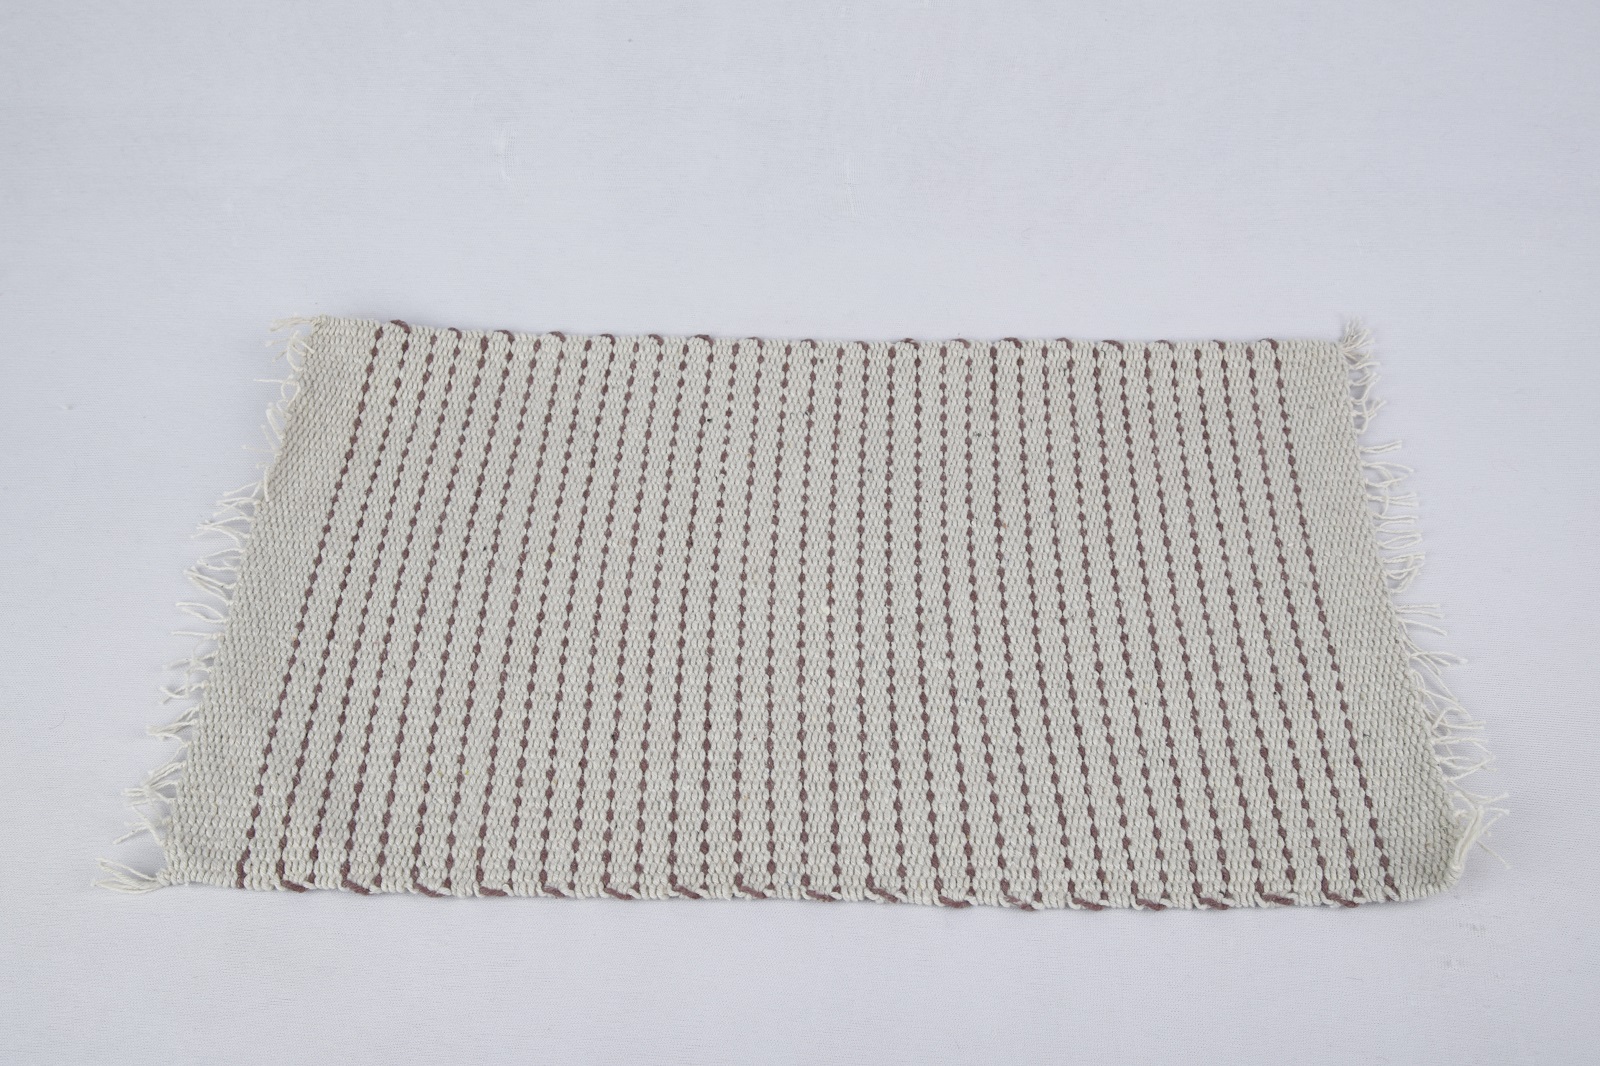 Woven Line placemat